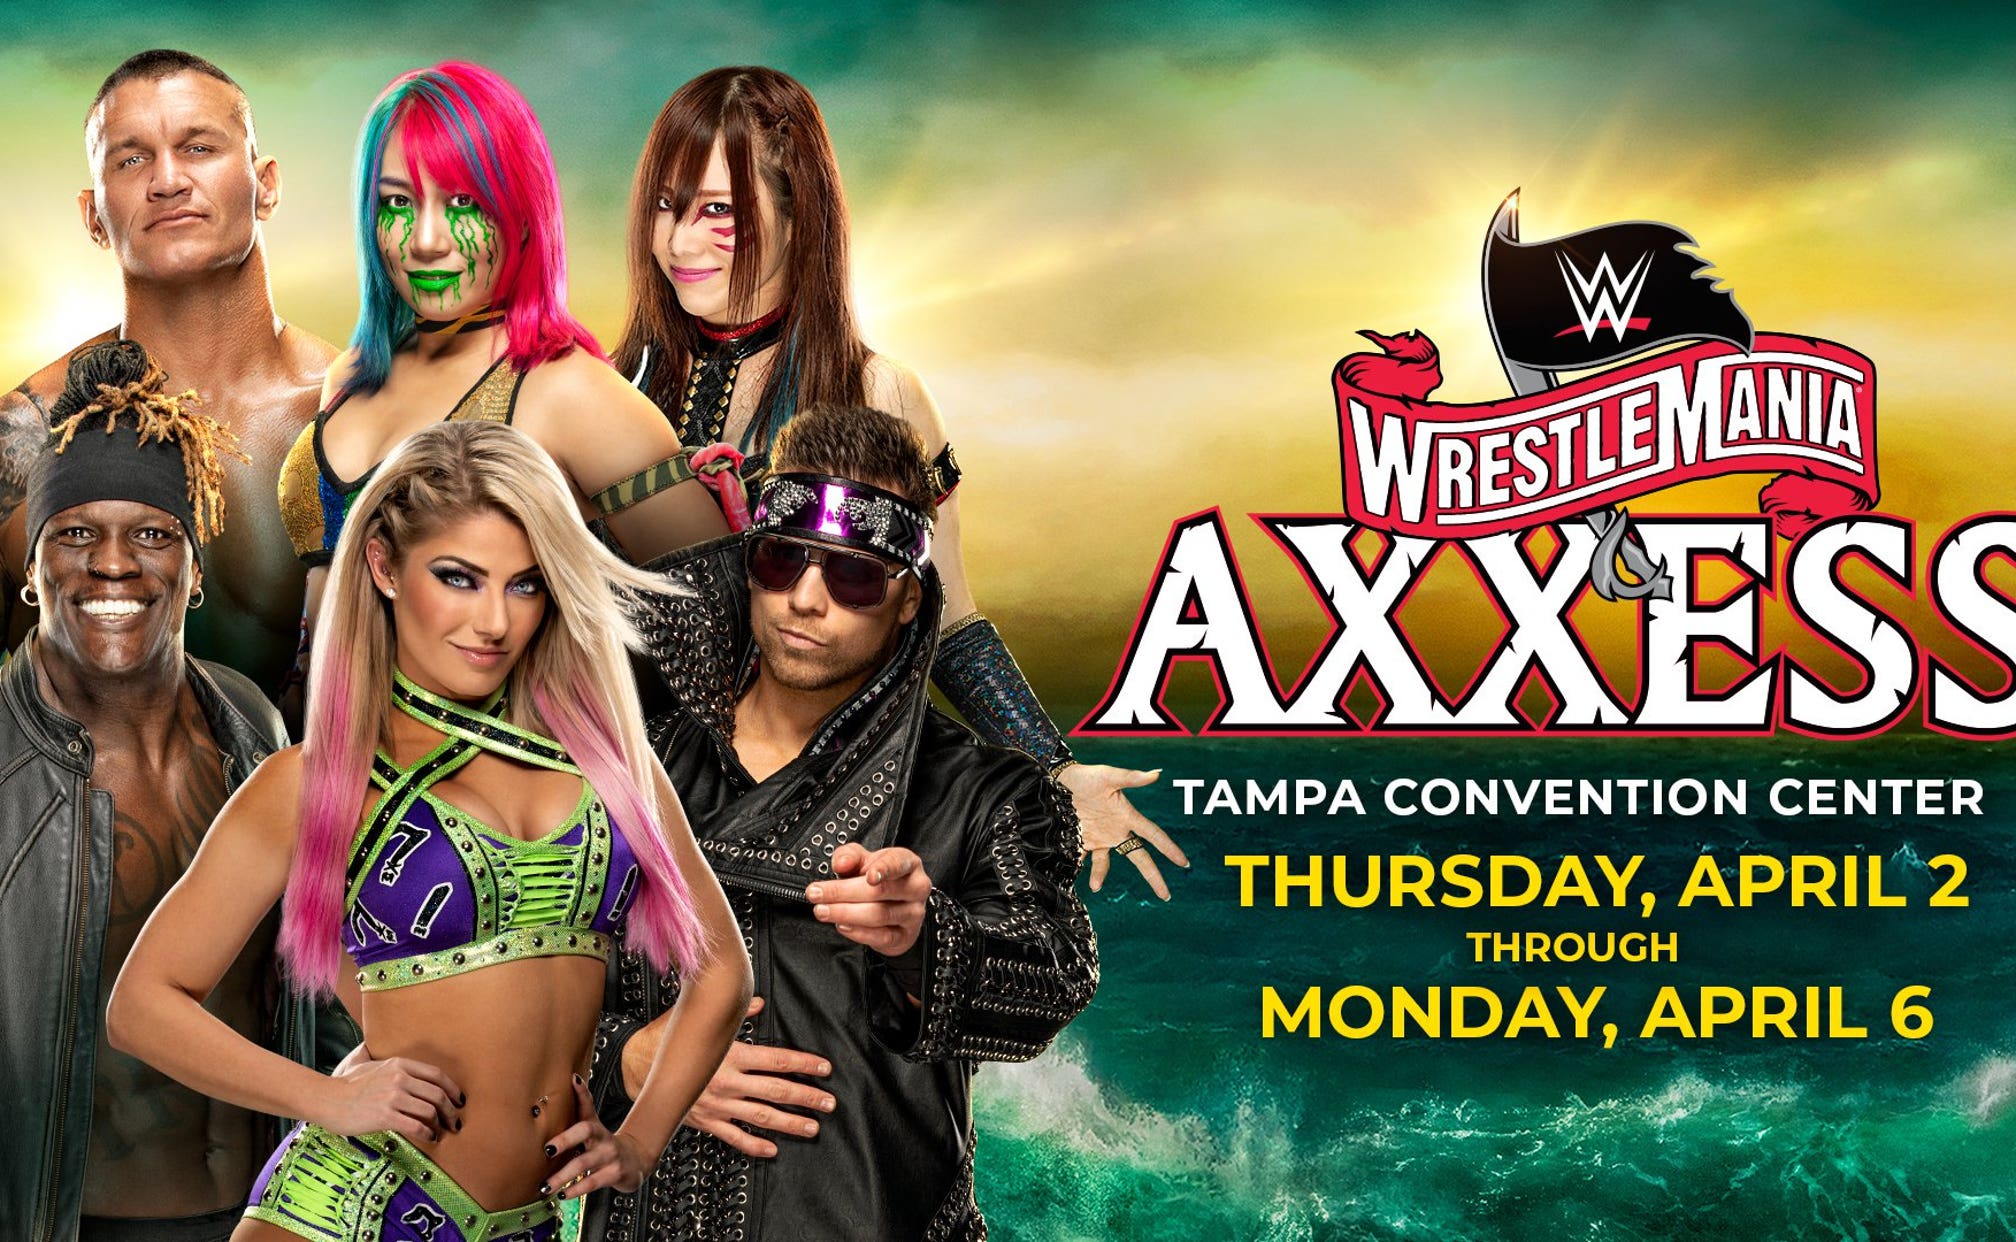 WrestleMania Axxess tickets are available now! FOX Sports